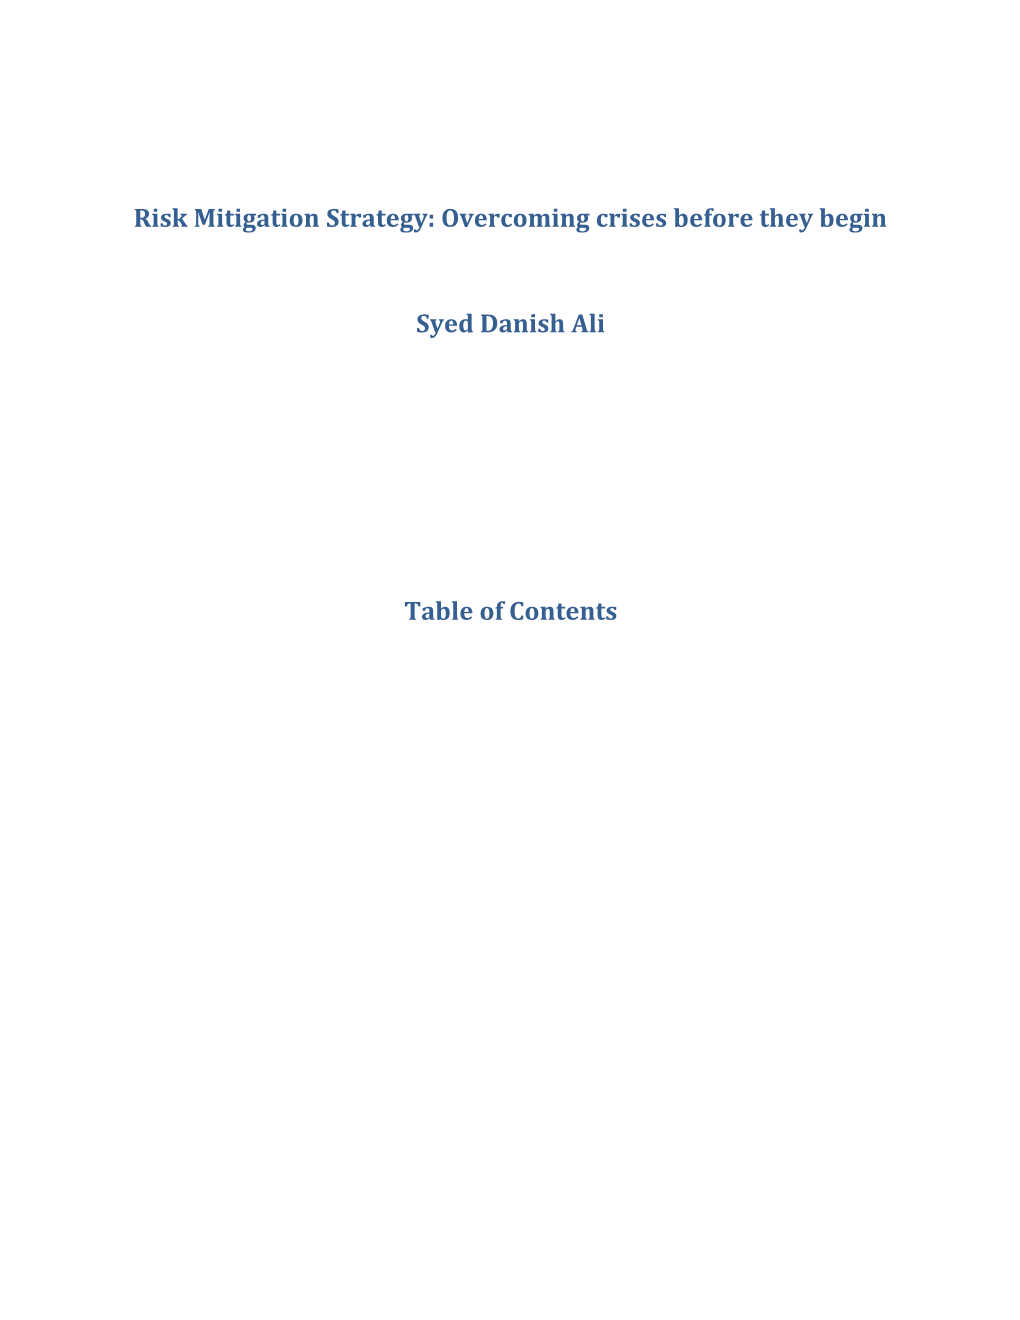 Risk Mitigation Strategy: Overcoming Crises Before They Begin